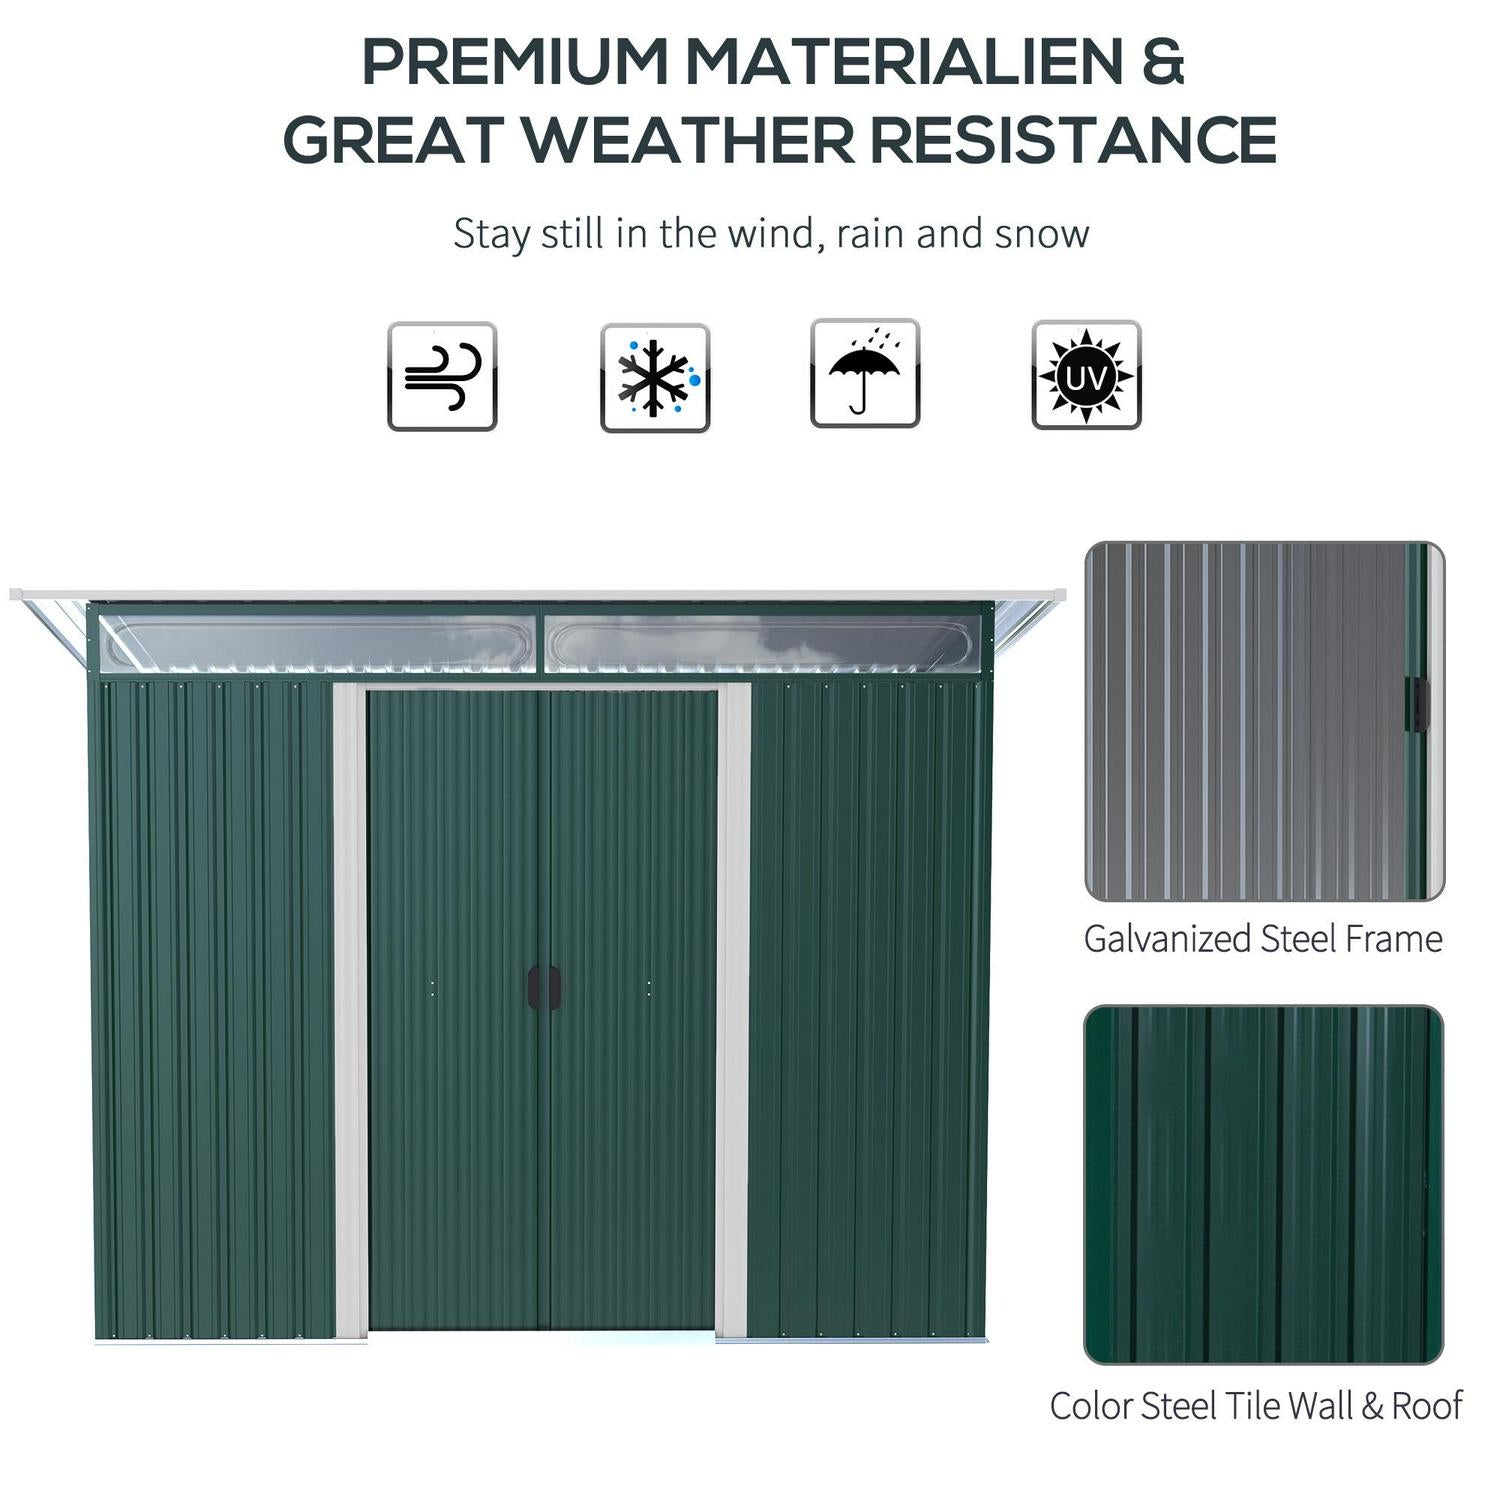 Pent Roofed Metal Garden Shed House Hut Gardening Tool Storage Foundation And Ventilation 260L X 133W X 200Hcm